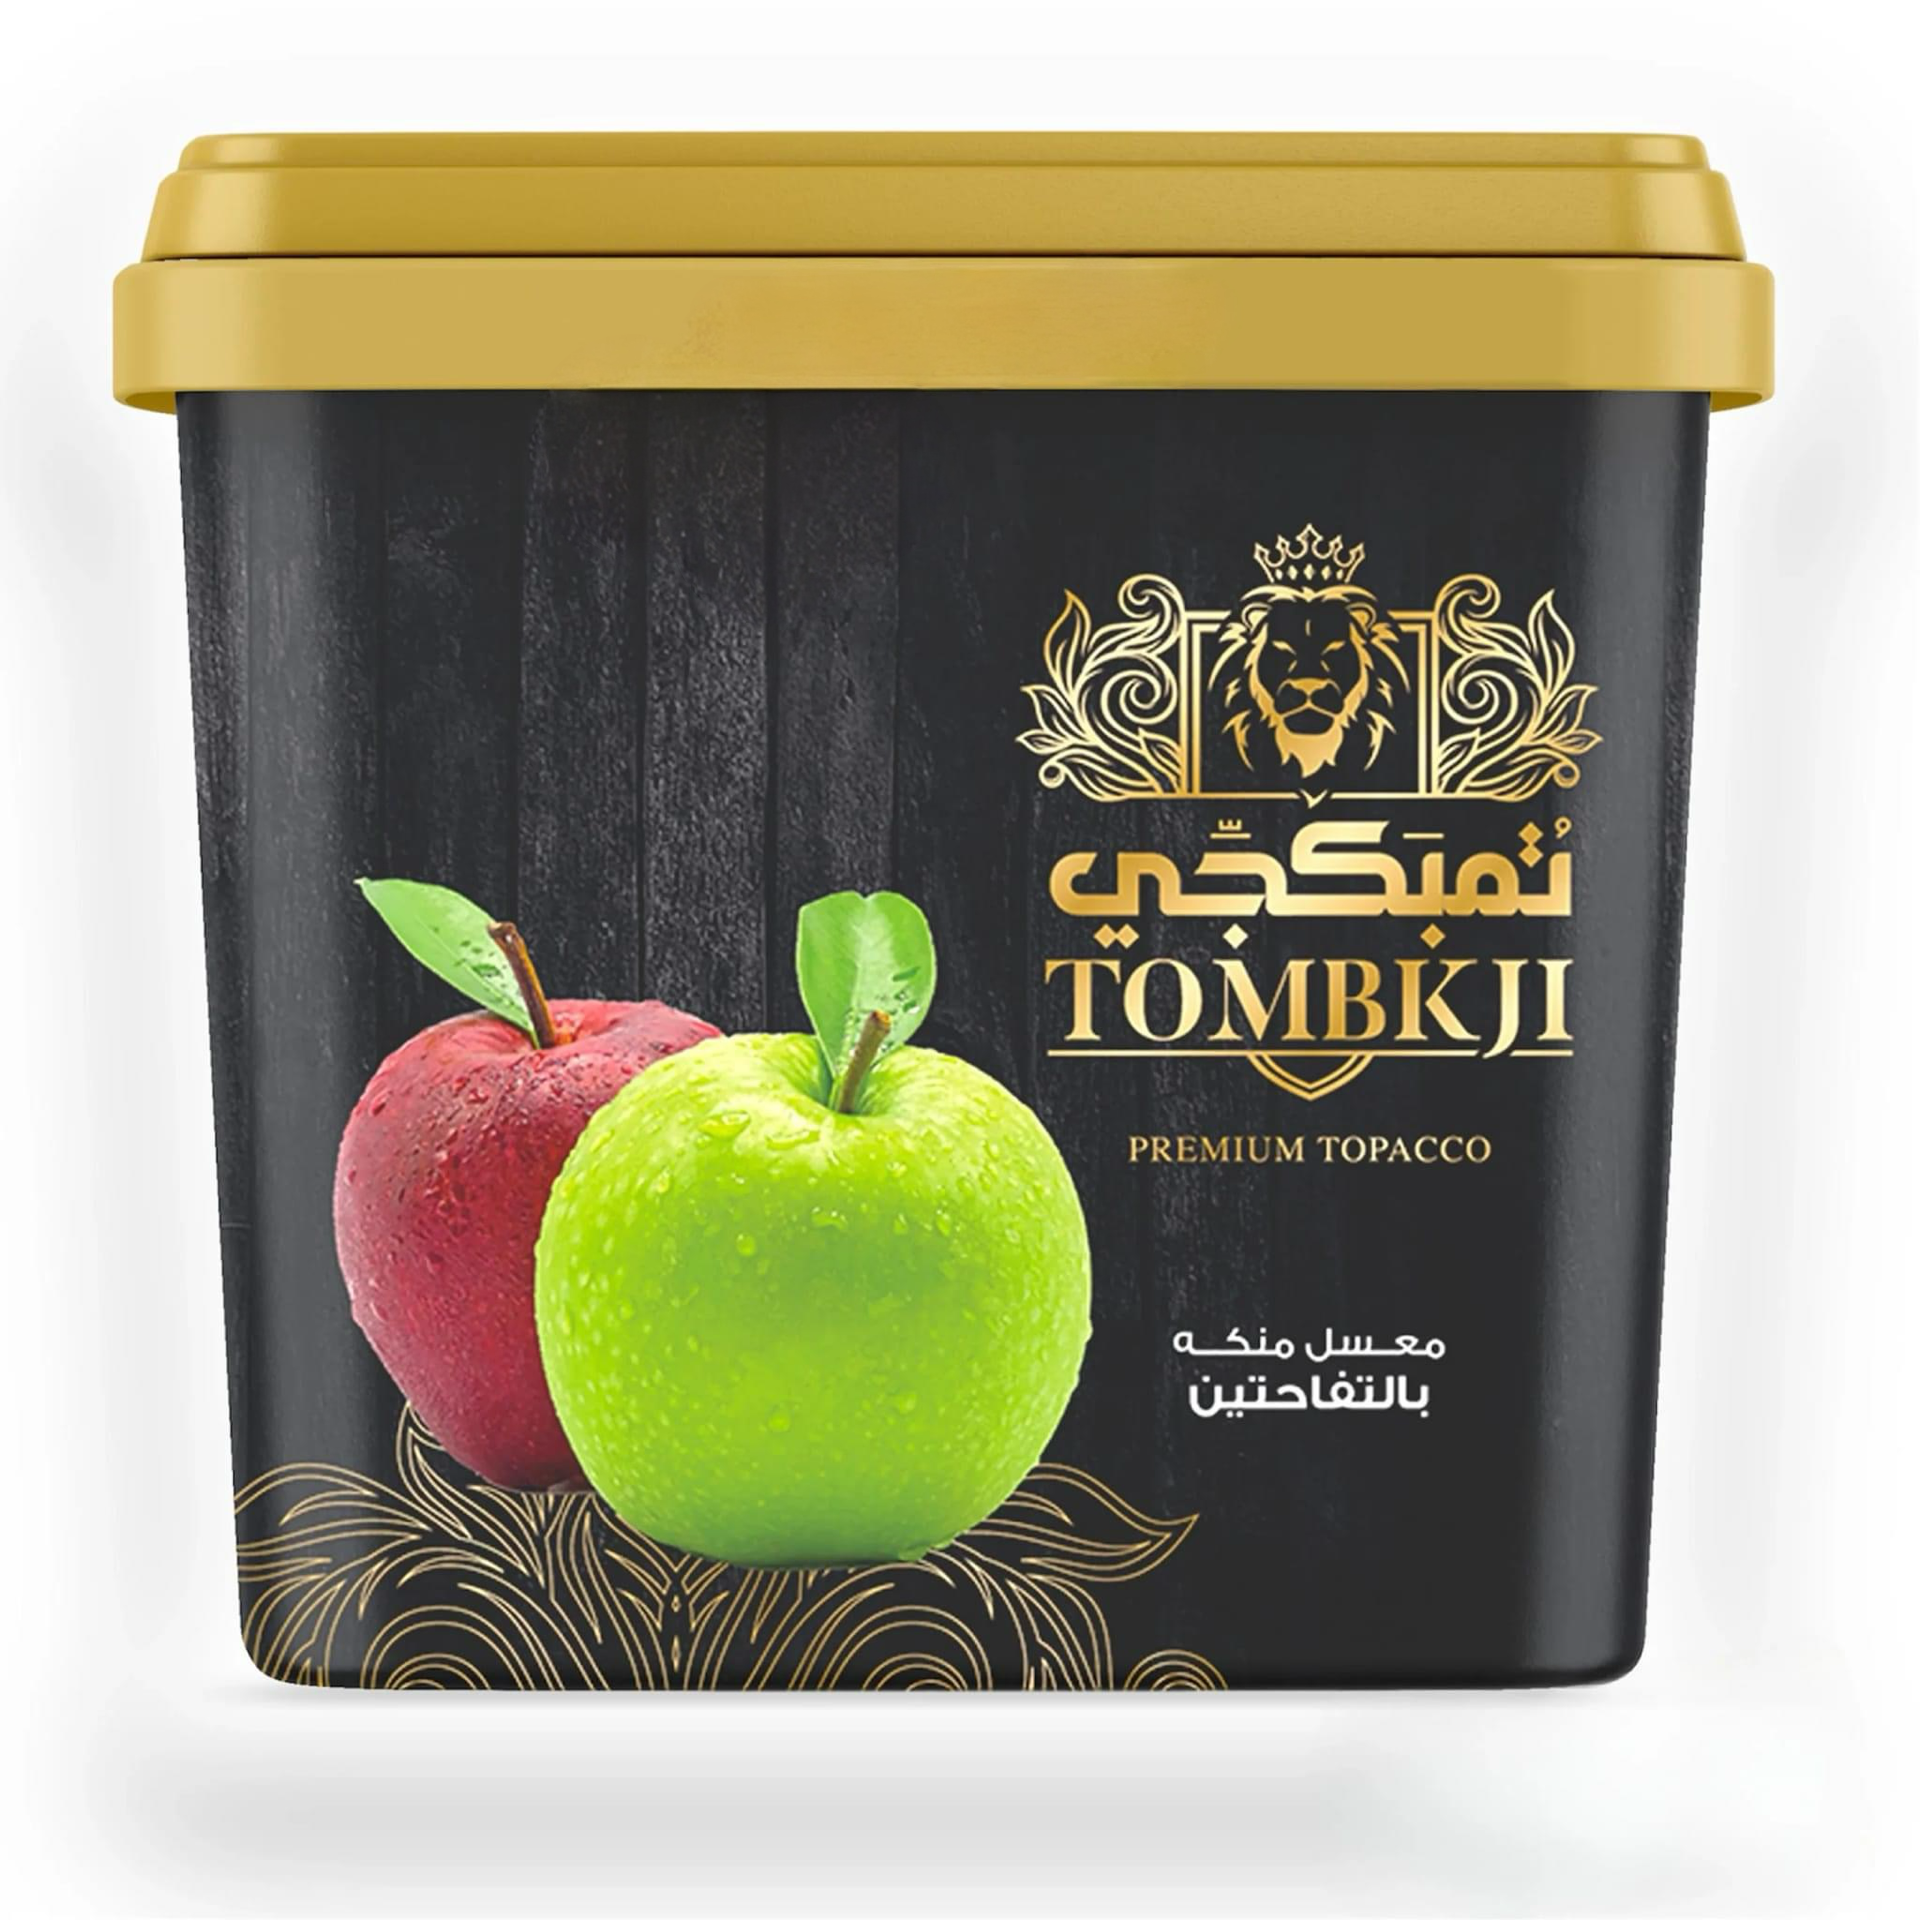 Tombkji Molasses Two Apples - معسل تمبكجي تفاحتين اشقر